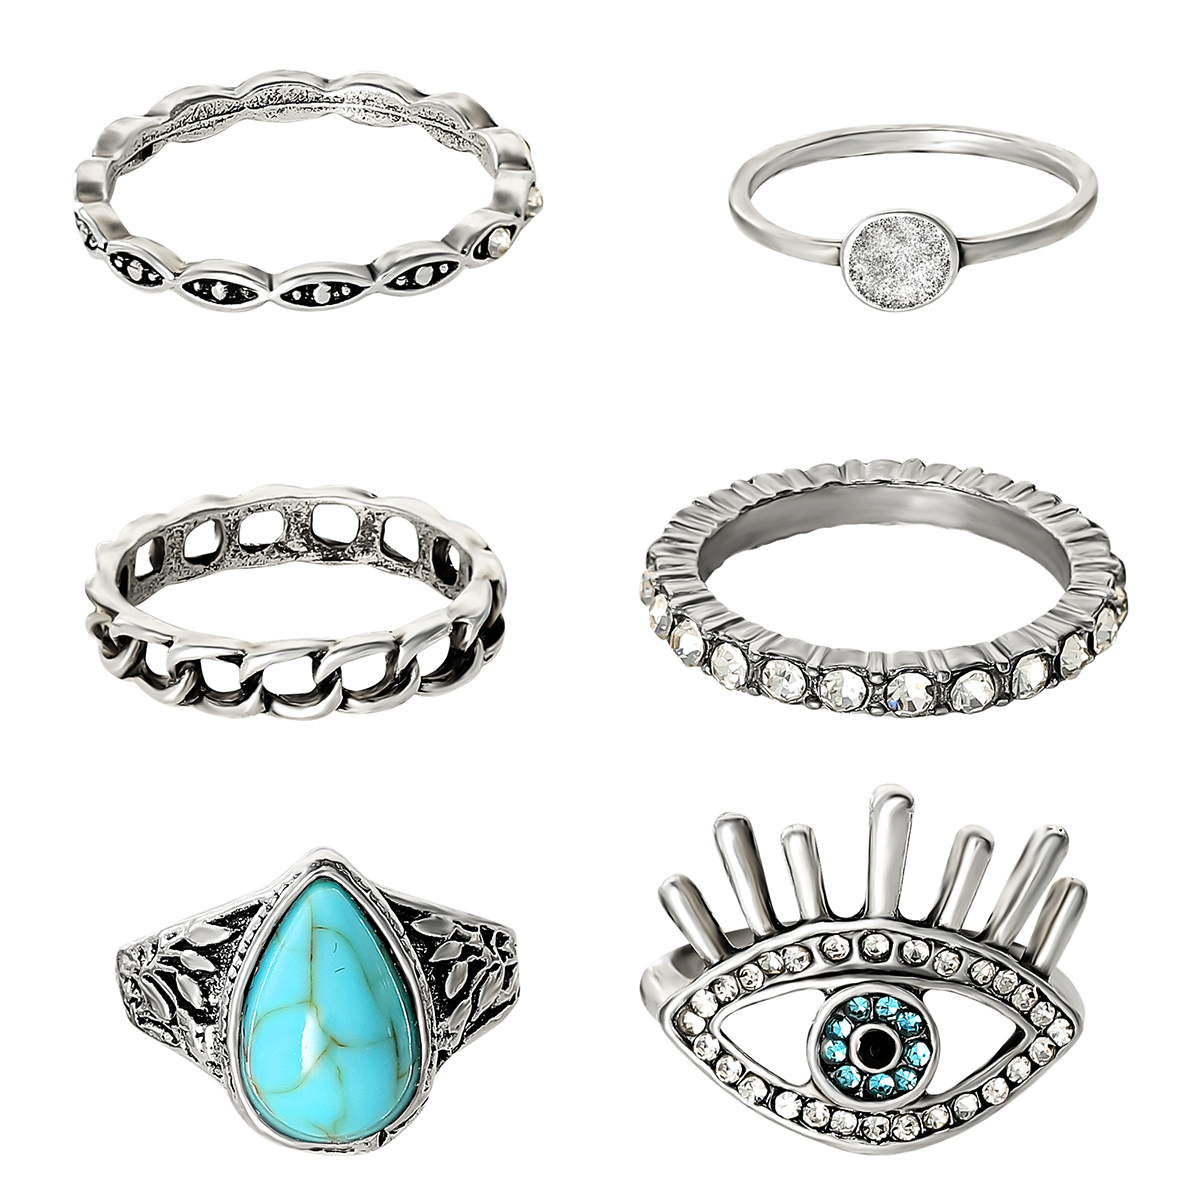 Jessica Simpson 6pc. Evil Eye & Reconstituted Turquoise Rings